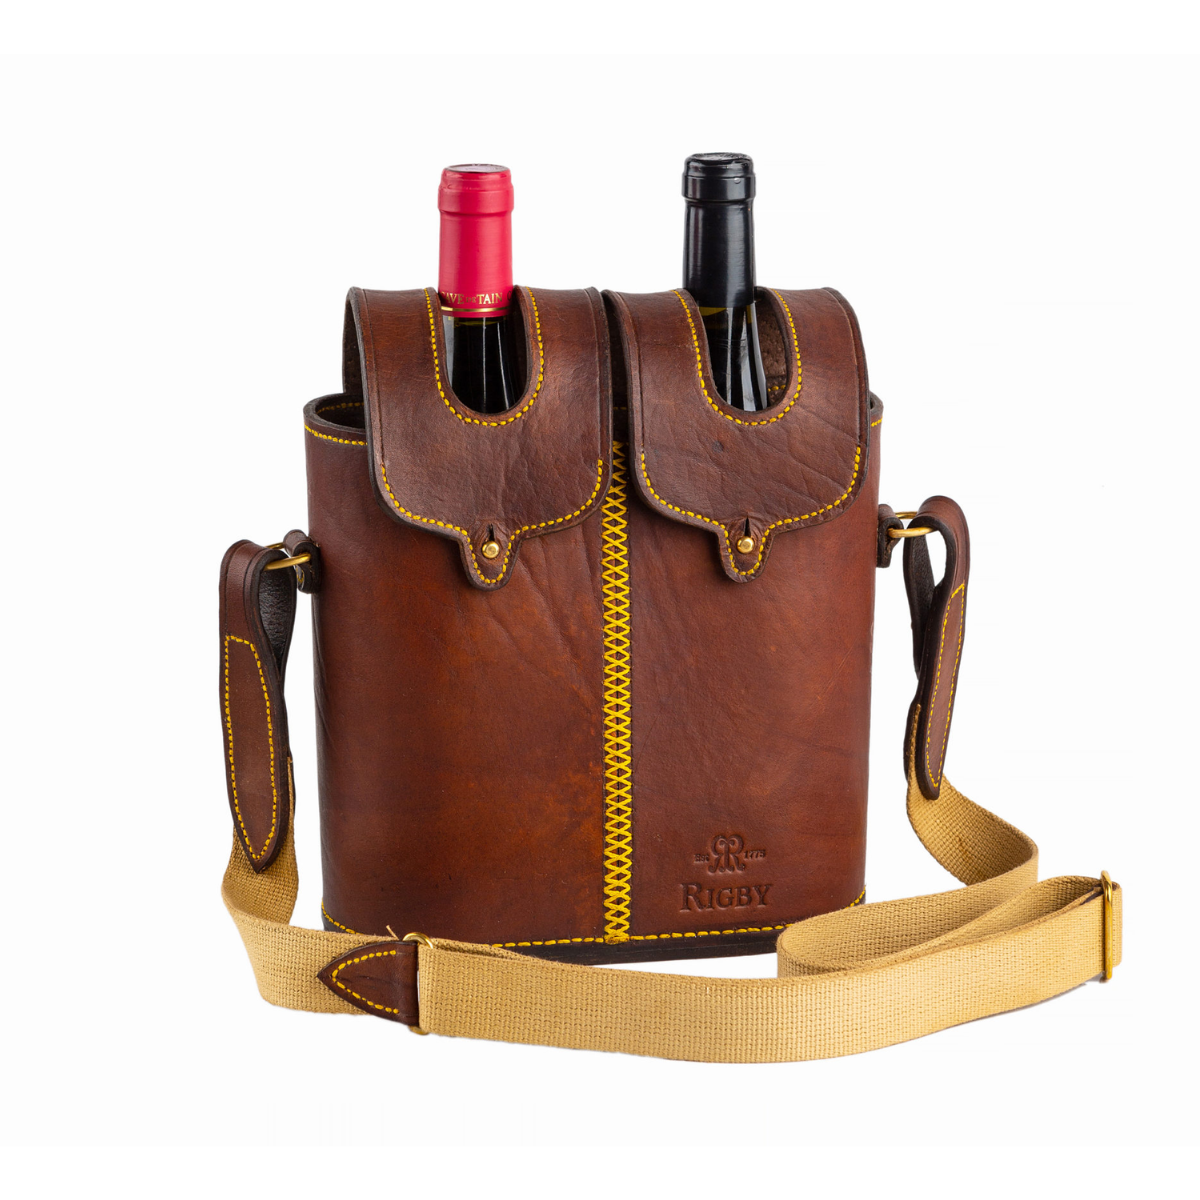 25. Toast to Three Years of Love with a Stylish Leather Wine Bottle Carrier